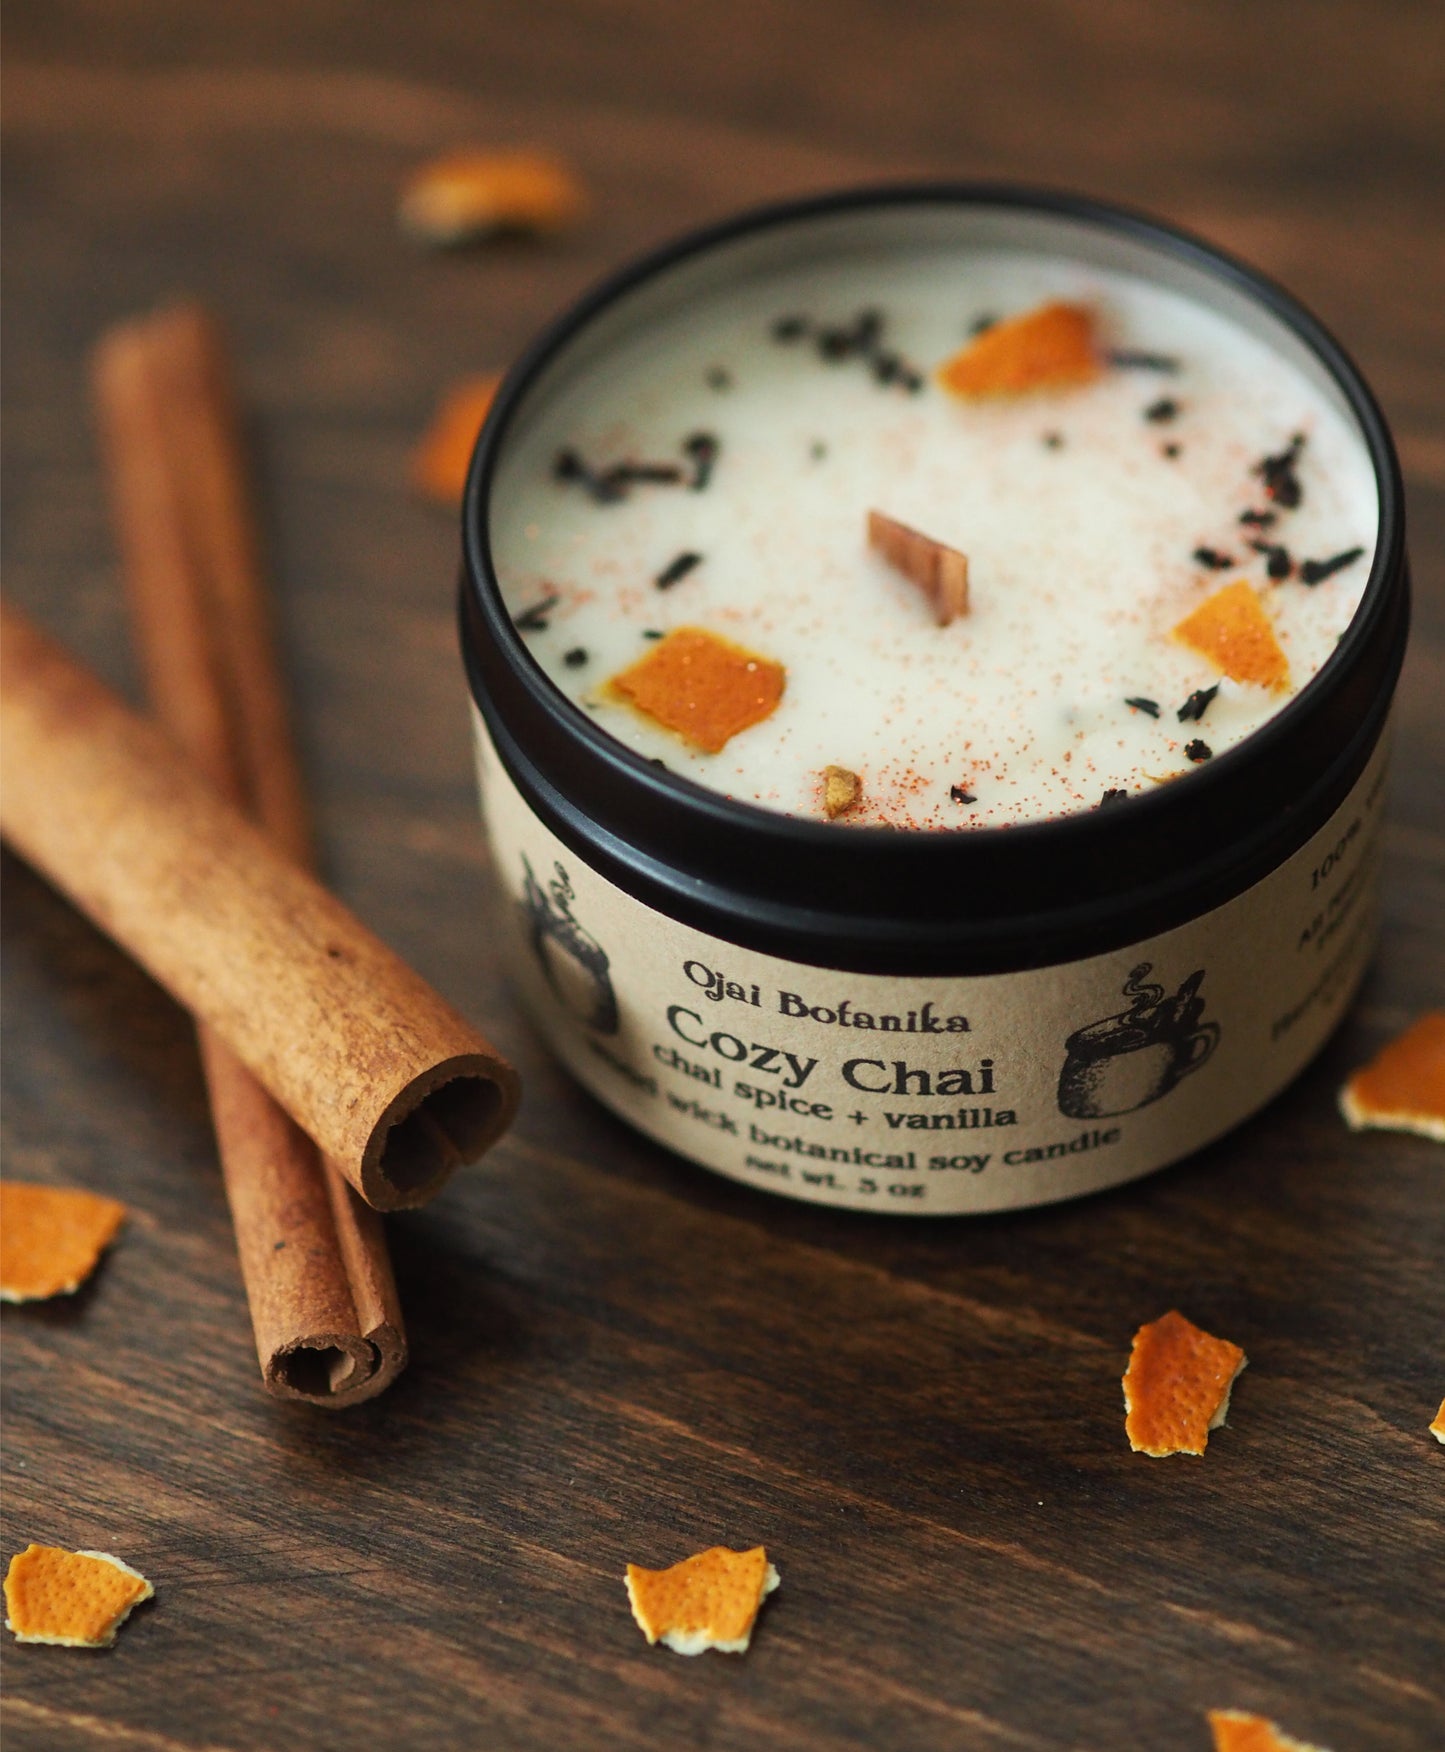 Cozy Chai - Chai Spice & Vanilla - Wood Wick Soy Candle - Limited Edition